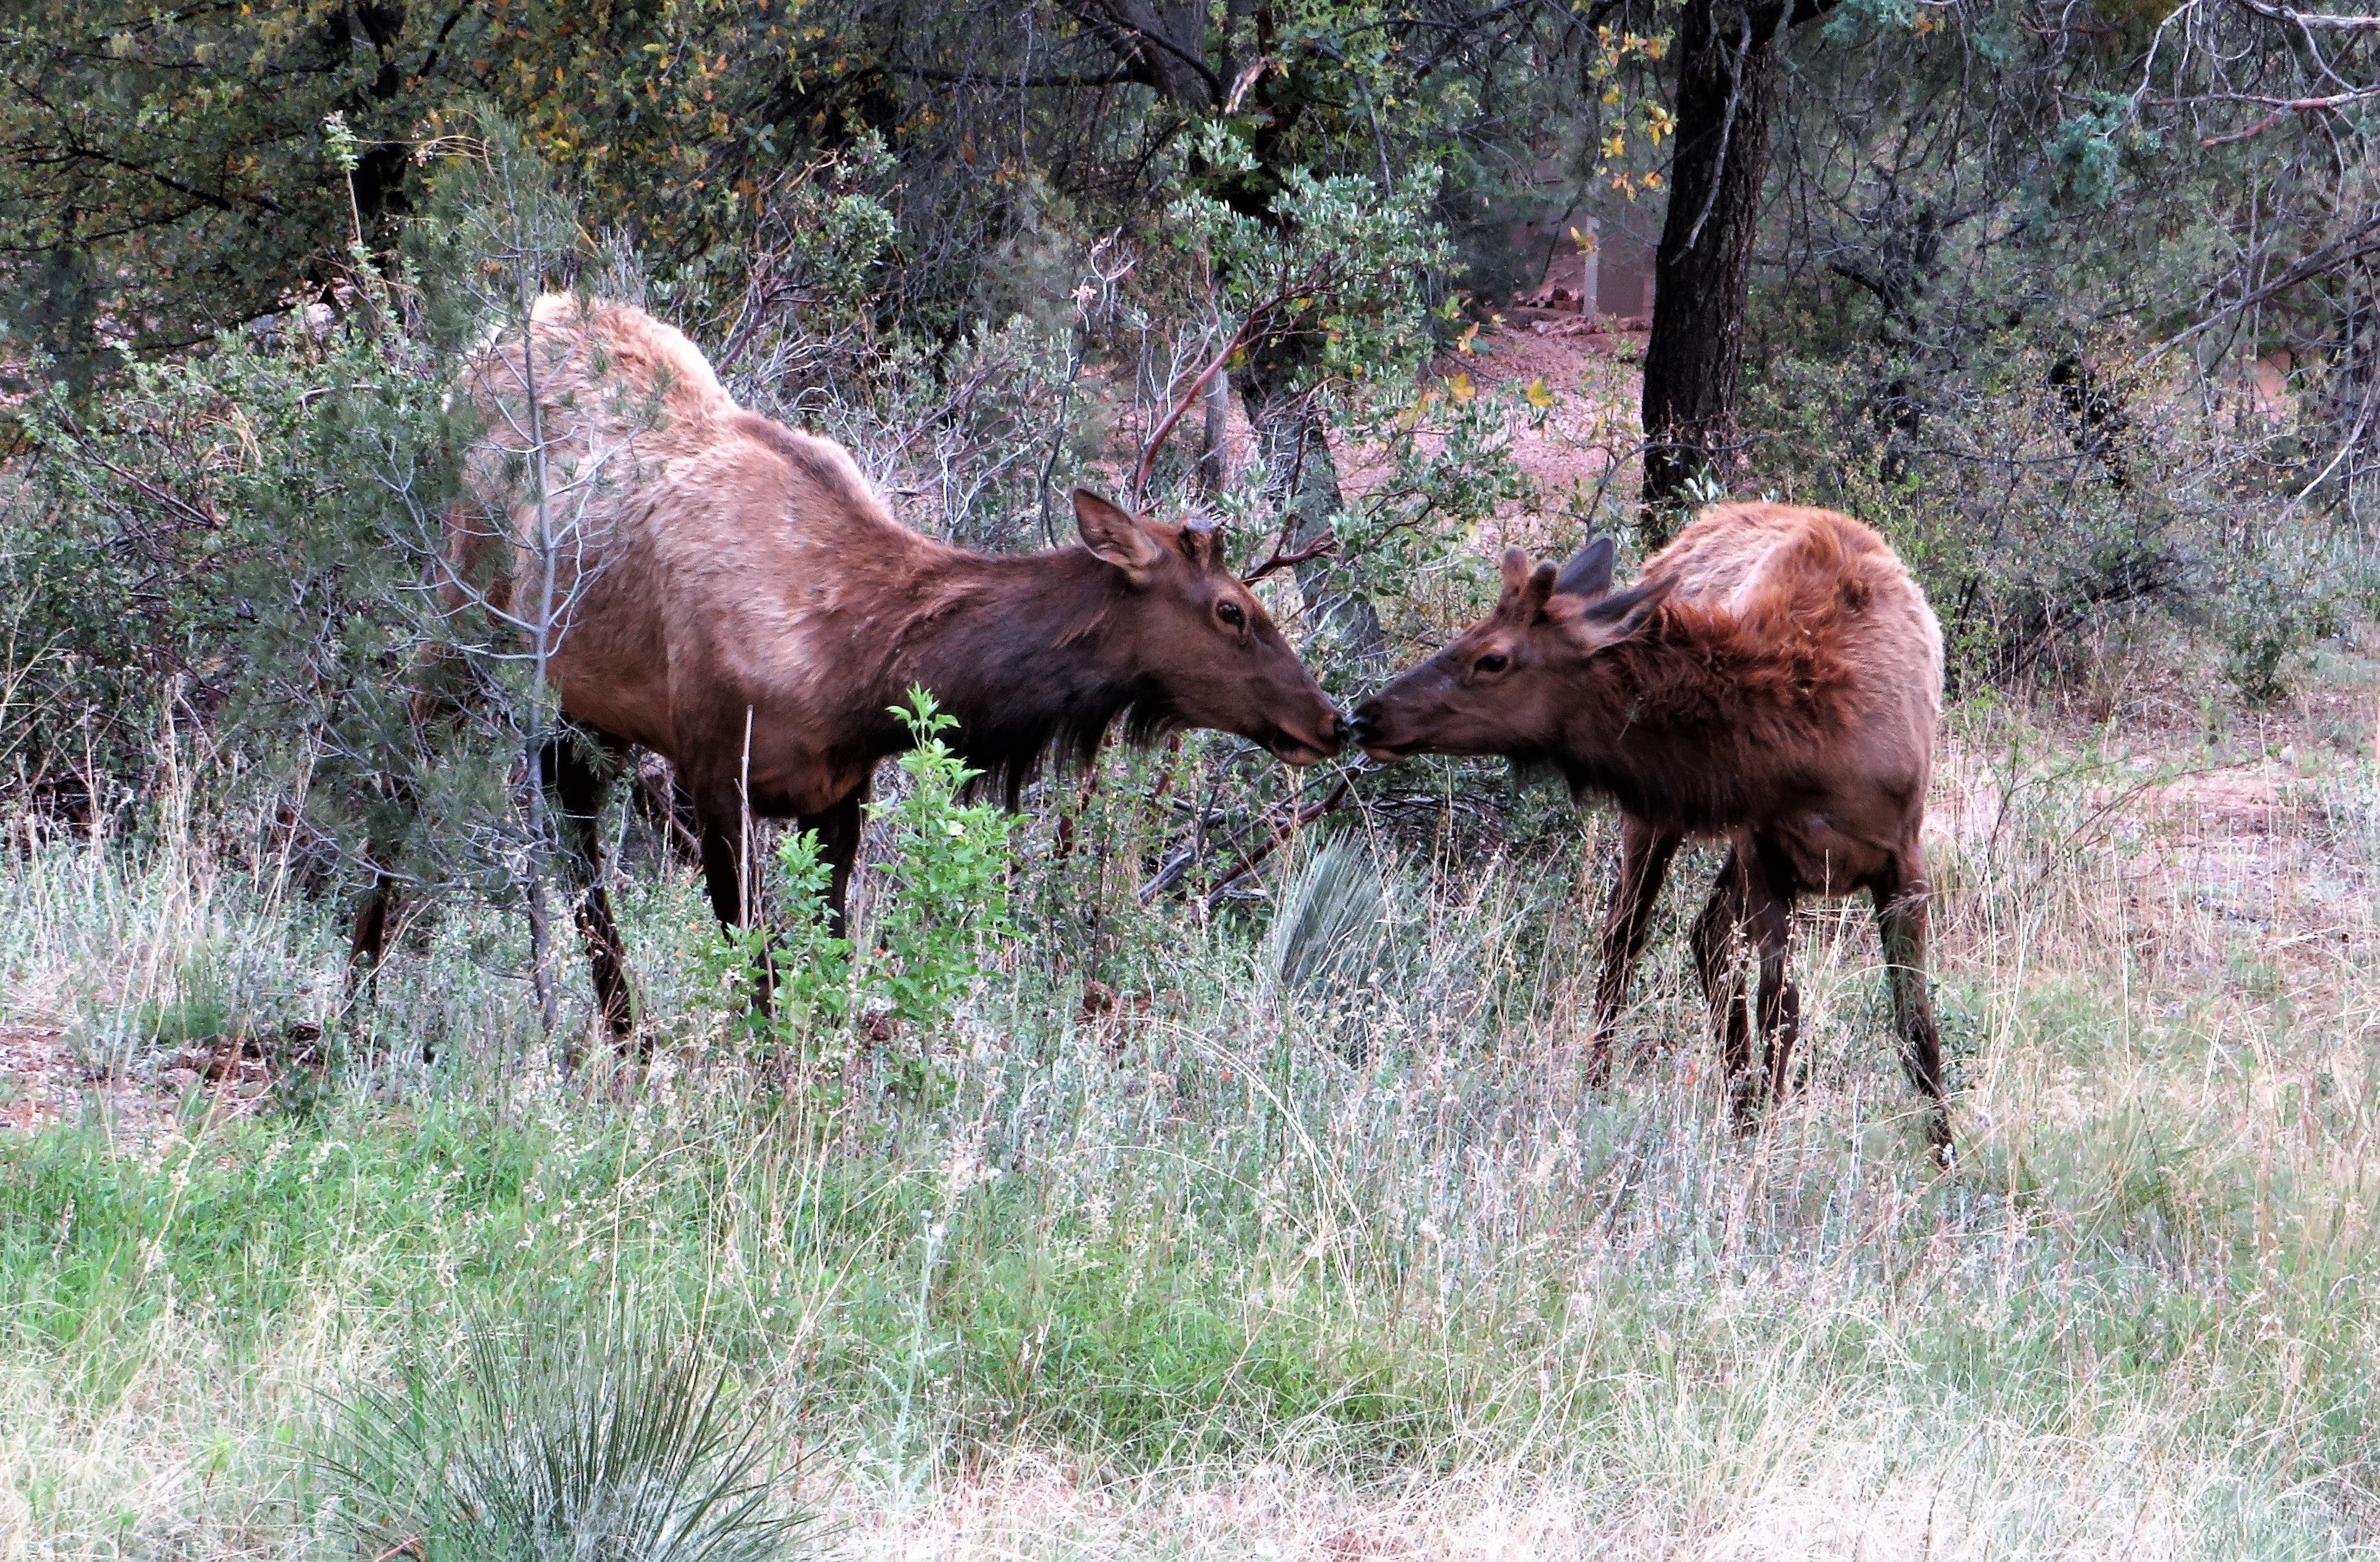 Photo by YVETTE HOFFMAN  |  Two young bull elks just playing around and at one point they met with their noses. It displayed kindness and it got my attention
they were in a grassed area just horse playing